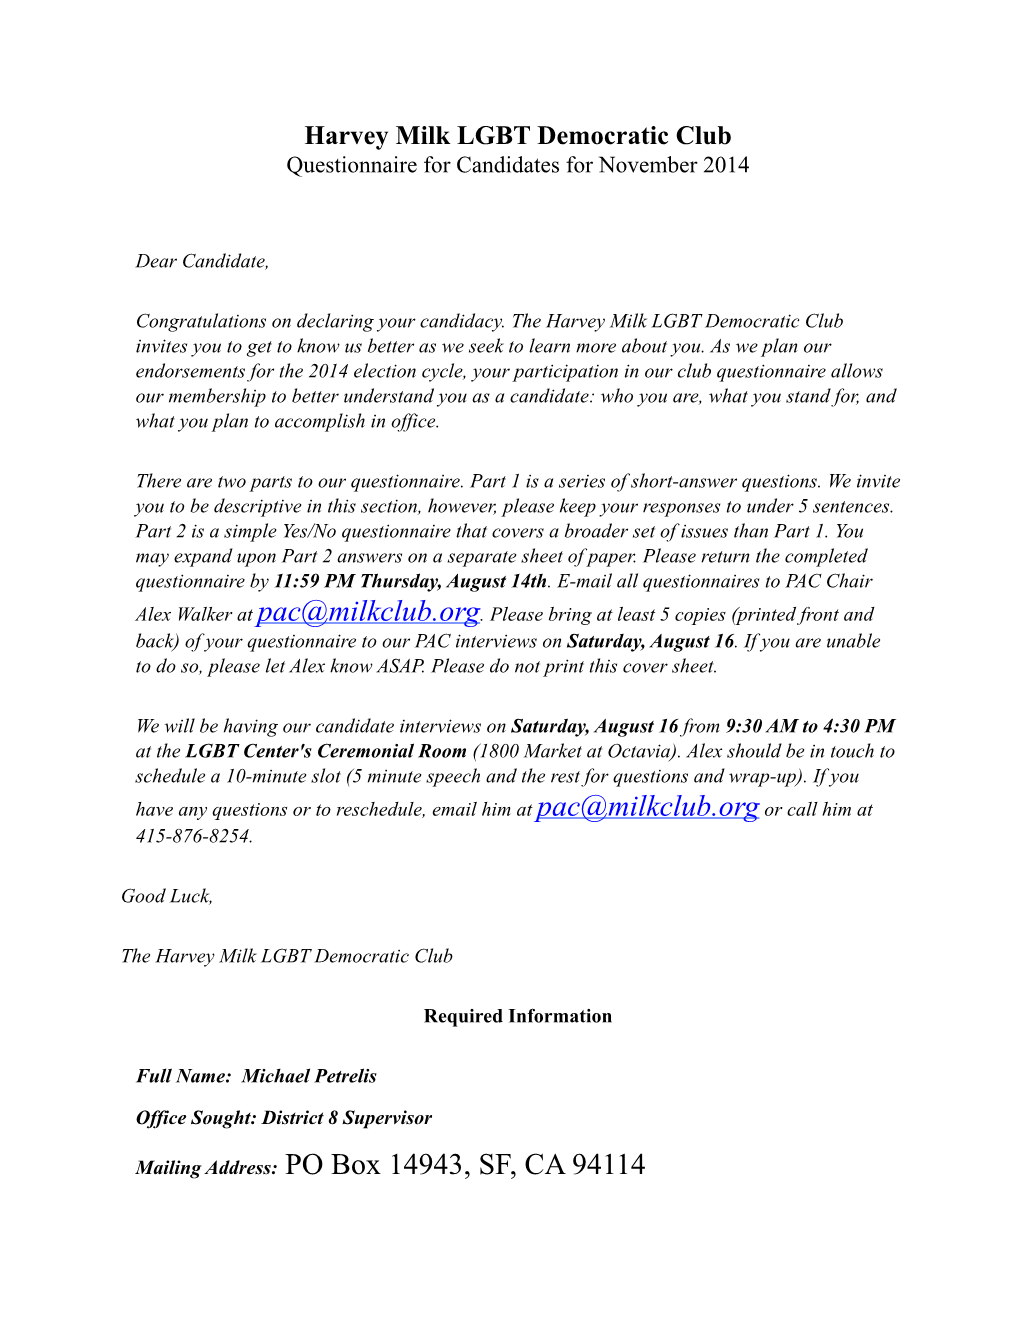 Harvey Milk LGBT Democratic Club Questionnaire for Candidates for November 2014